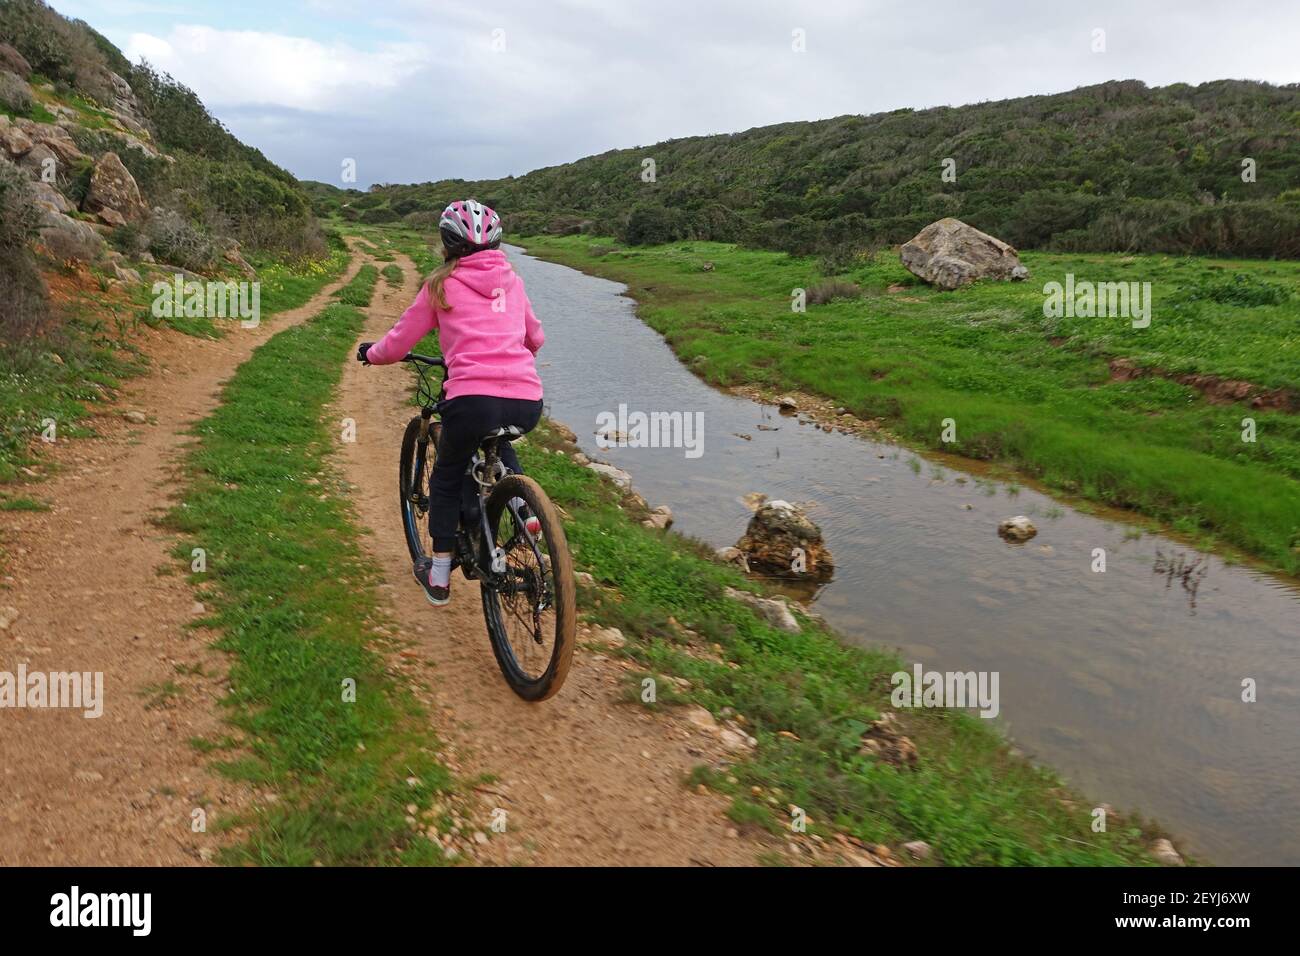 Girl on mountain bike cycling along a dirt track next to a river Stock Photo